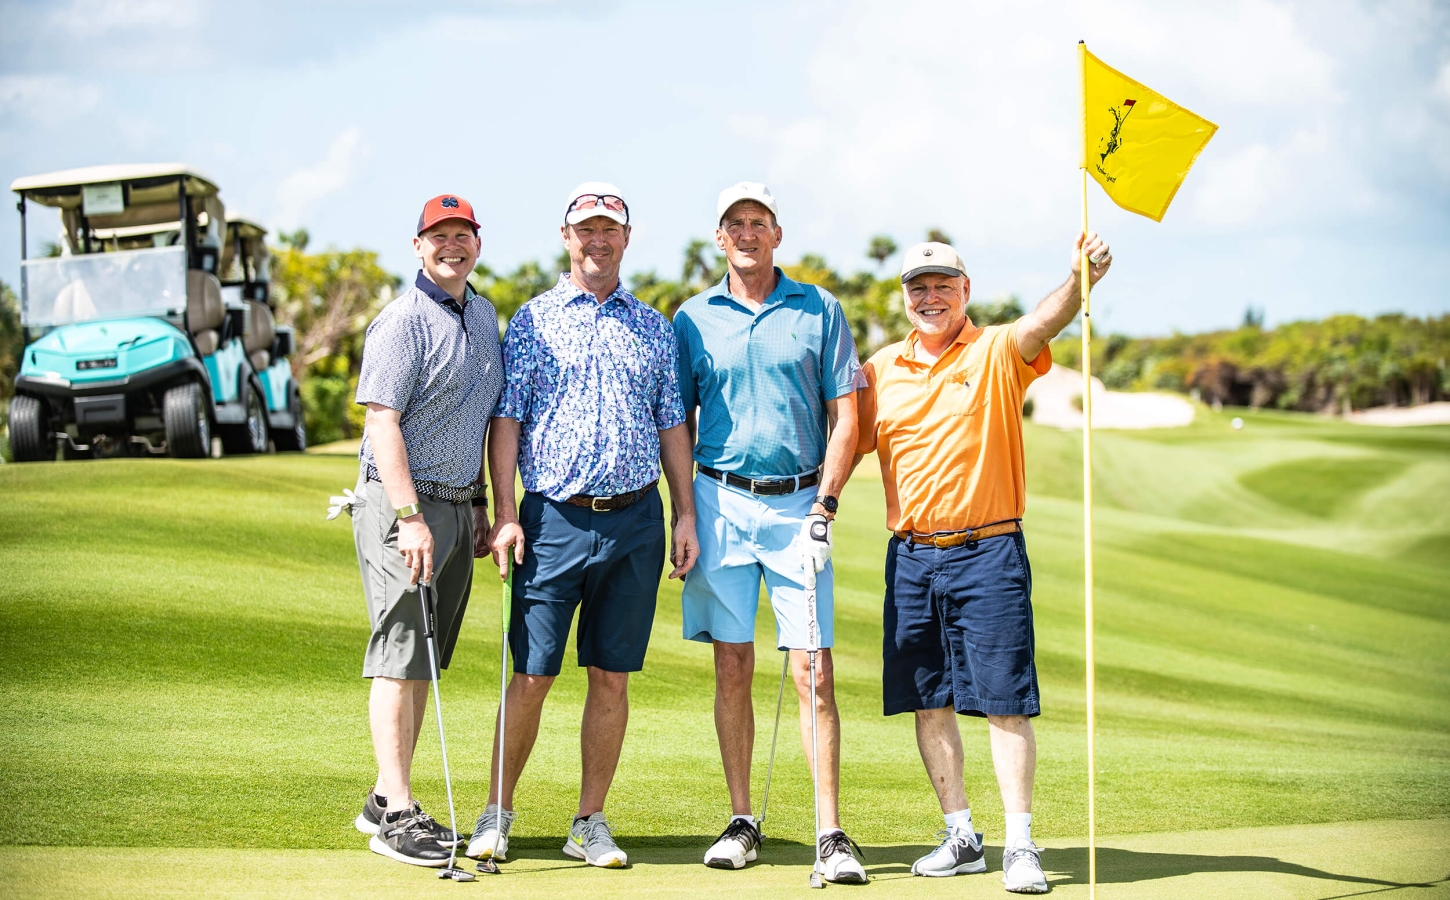 Golf Members posing for a picture at The Abaco Club, encapsulating the club lifestyle.